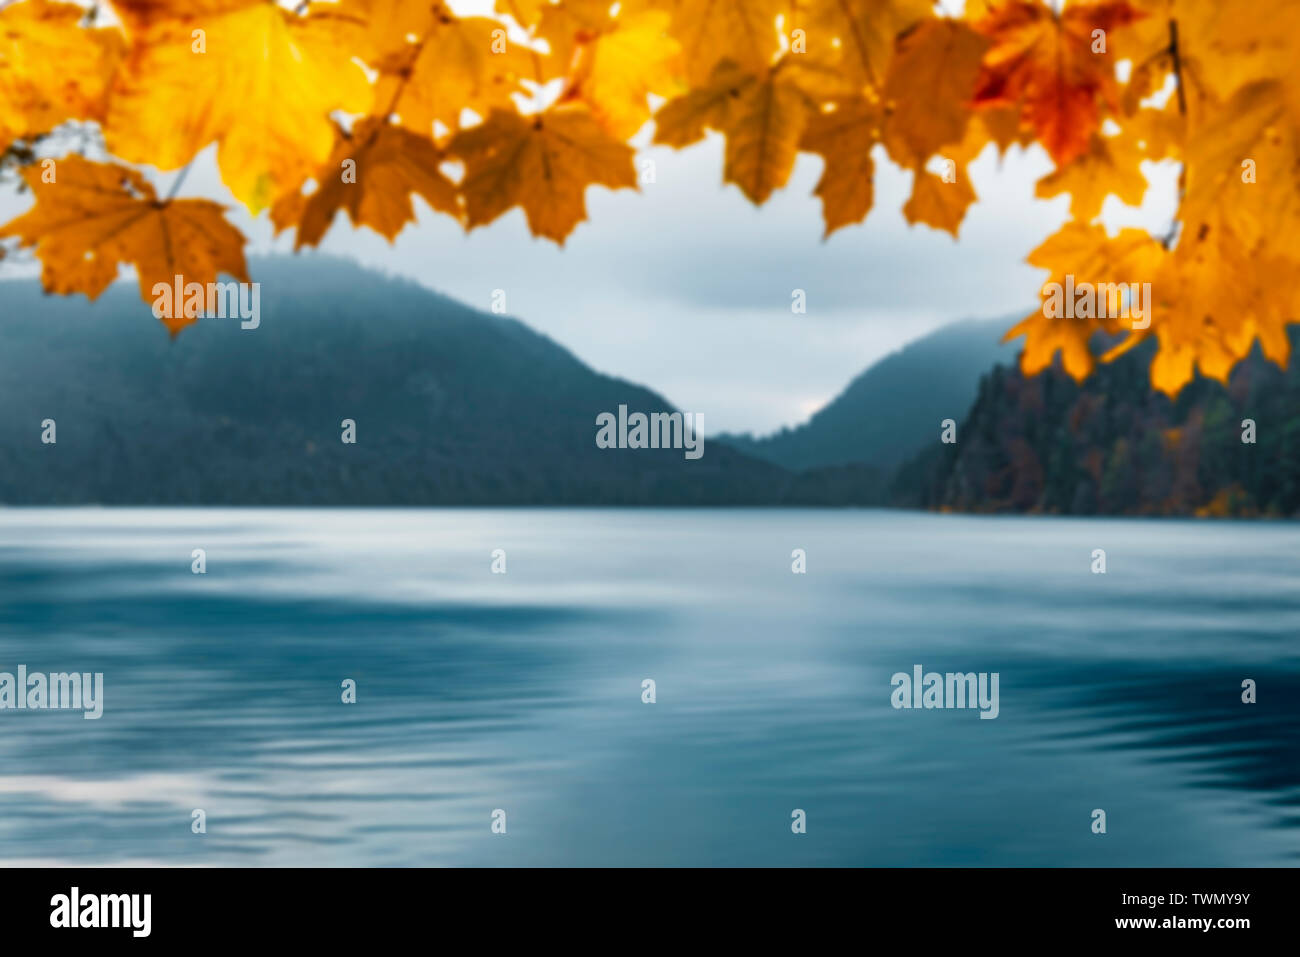 Blurred autumn nature background with yellow leaves as a frame for mountains and blue water lake, near Fussen, Germany. Out of focus fall backdrop. Stock Photo